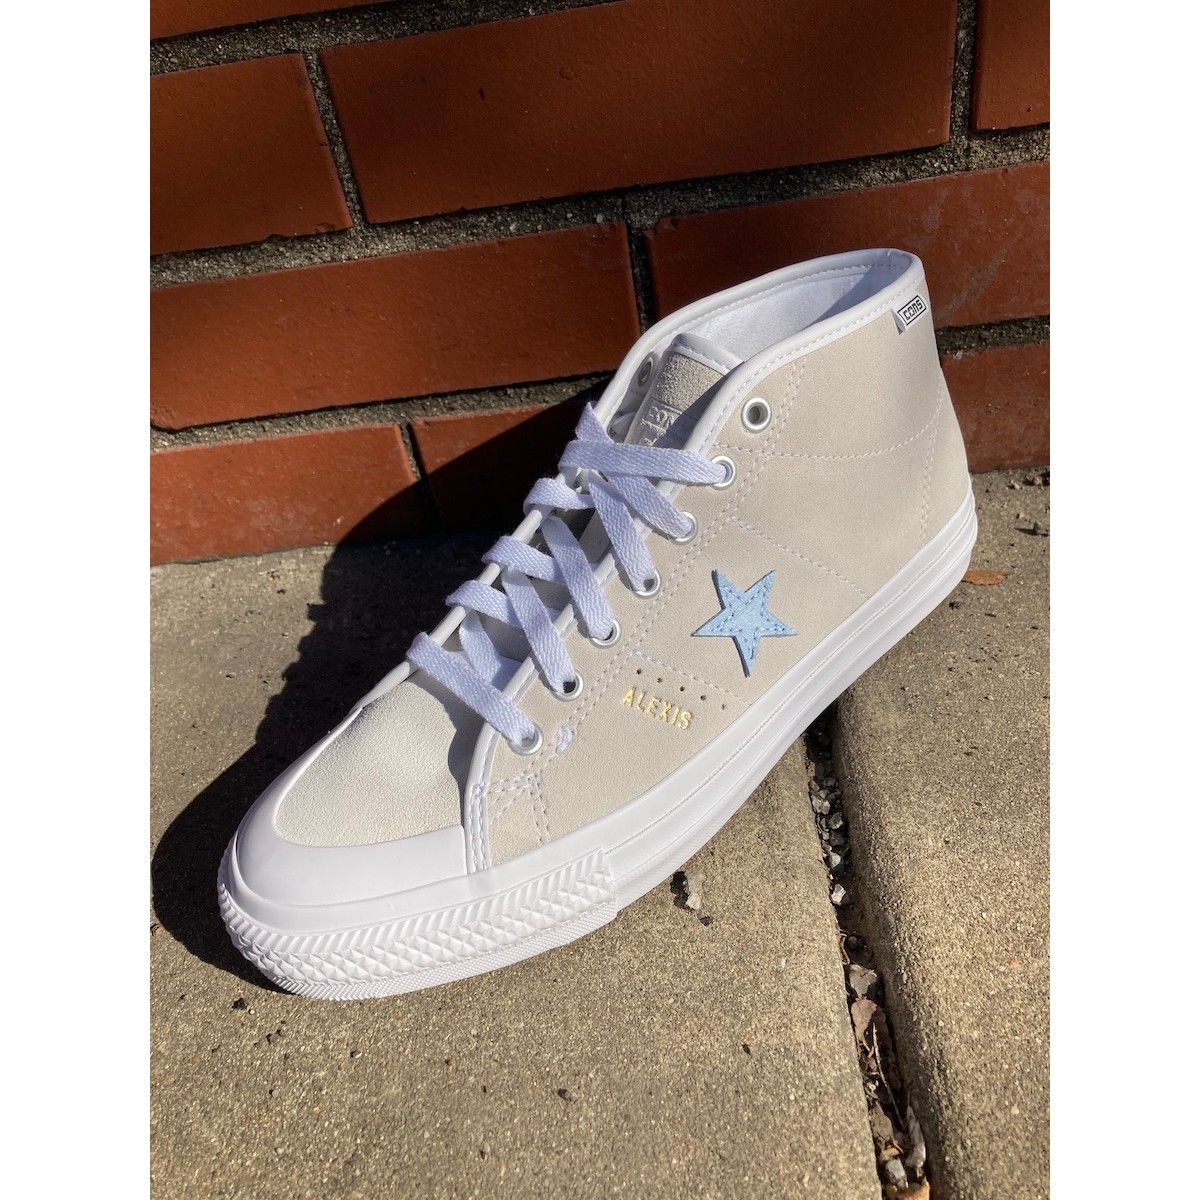 Converse One Star Pro Mid Footwear at Home